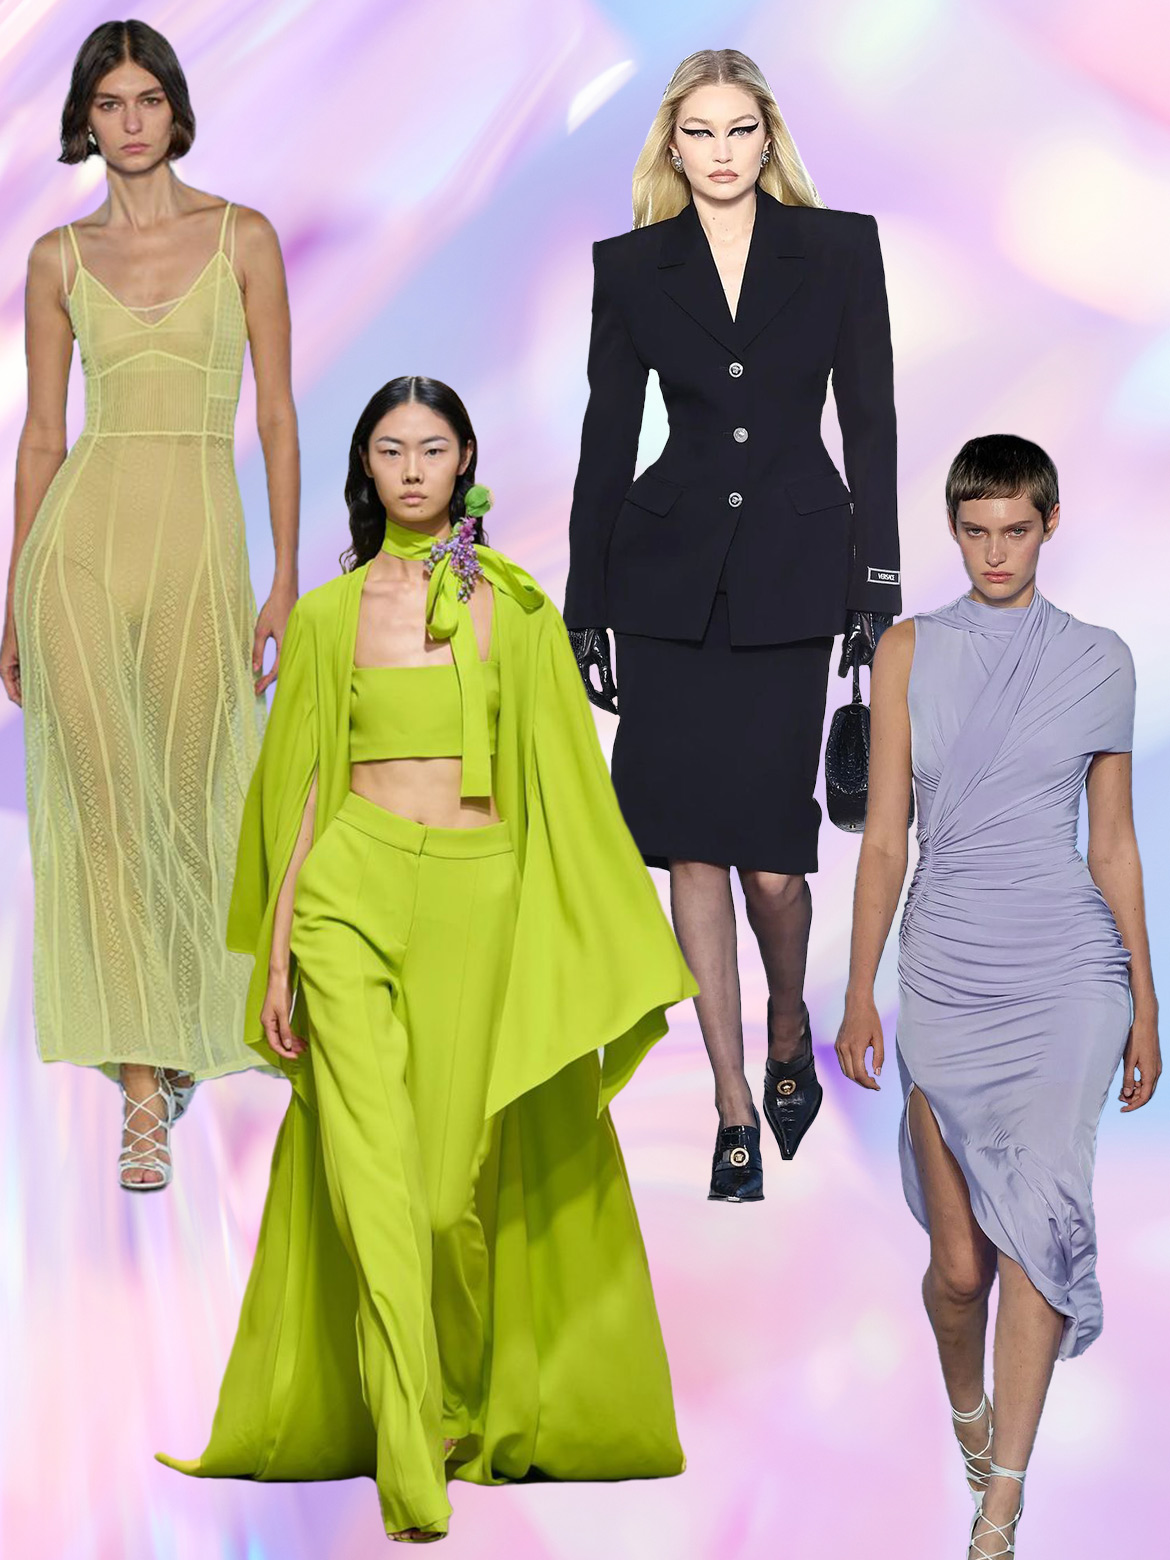 Haute stuff! Dive into the style world's most sizzling trends